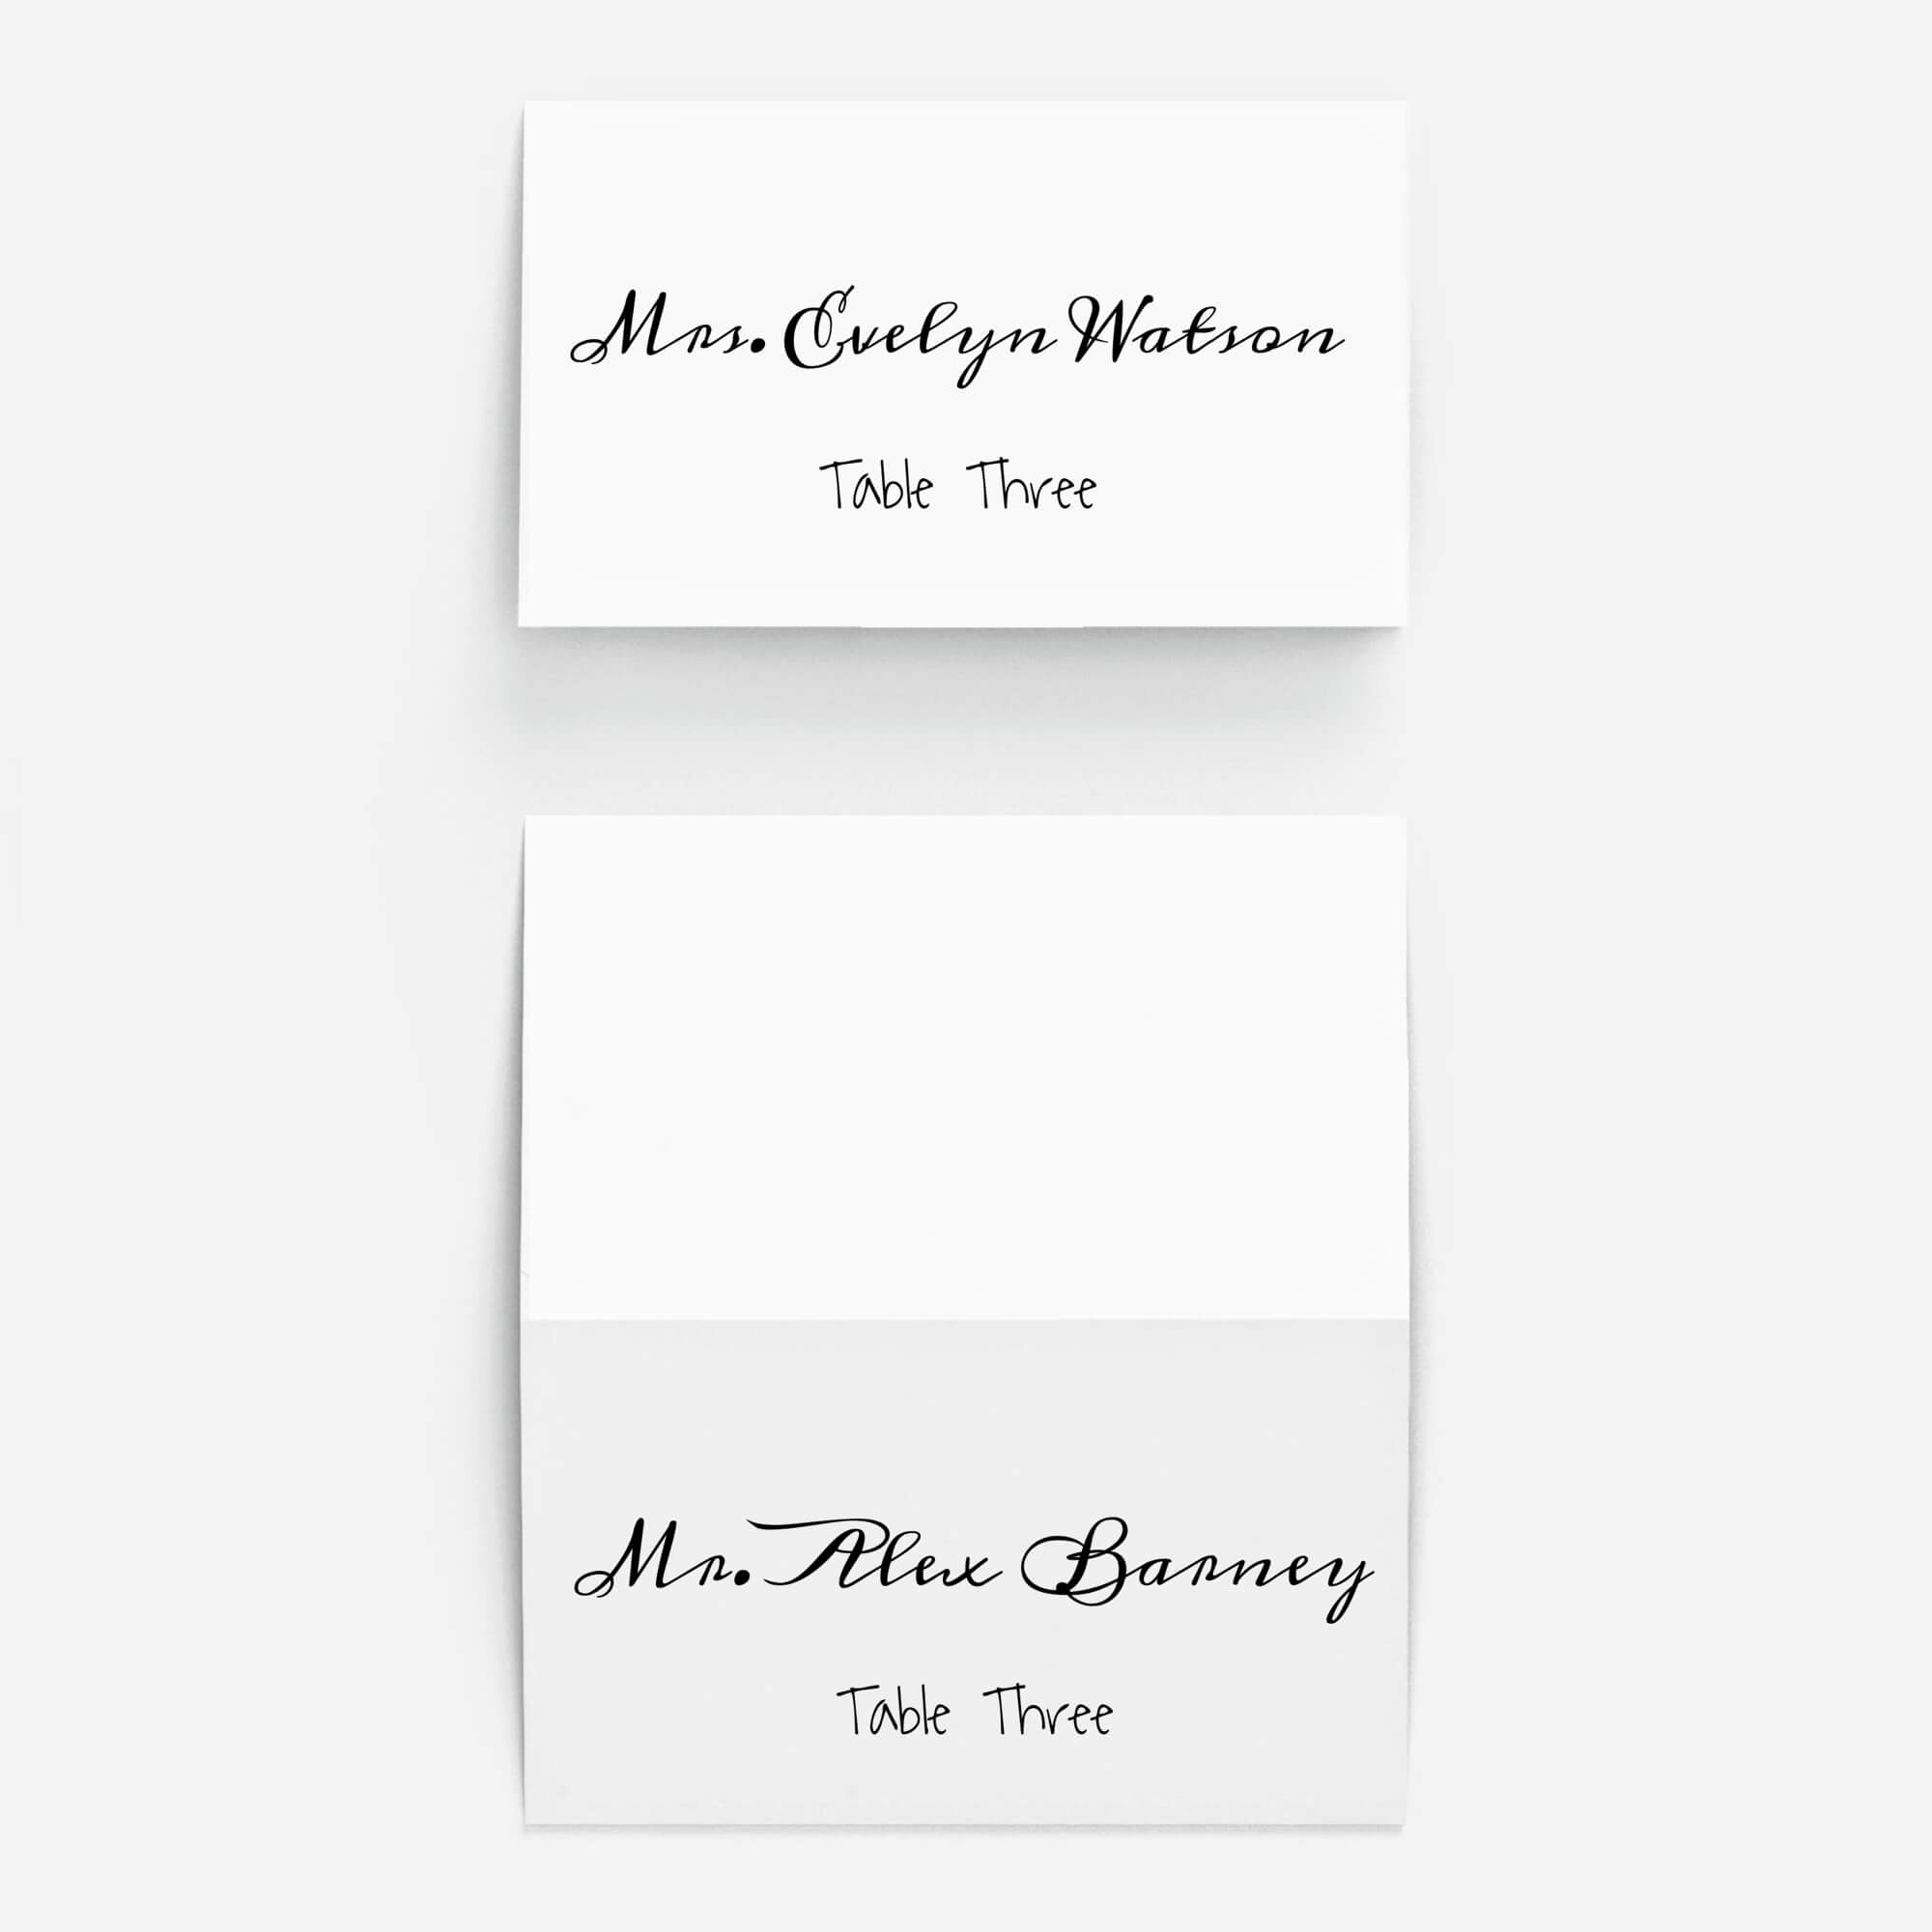 Pinplace Cards Online On 10 Stunning Fonts For Diy Inside Celebrate It Templates Place Cards